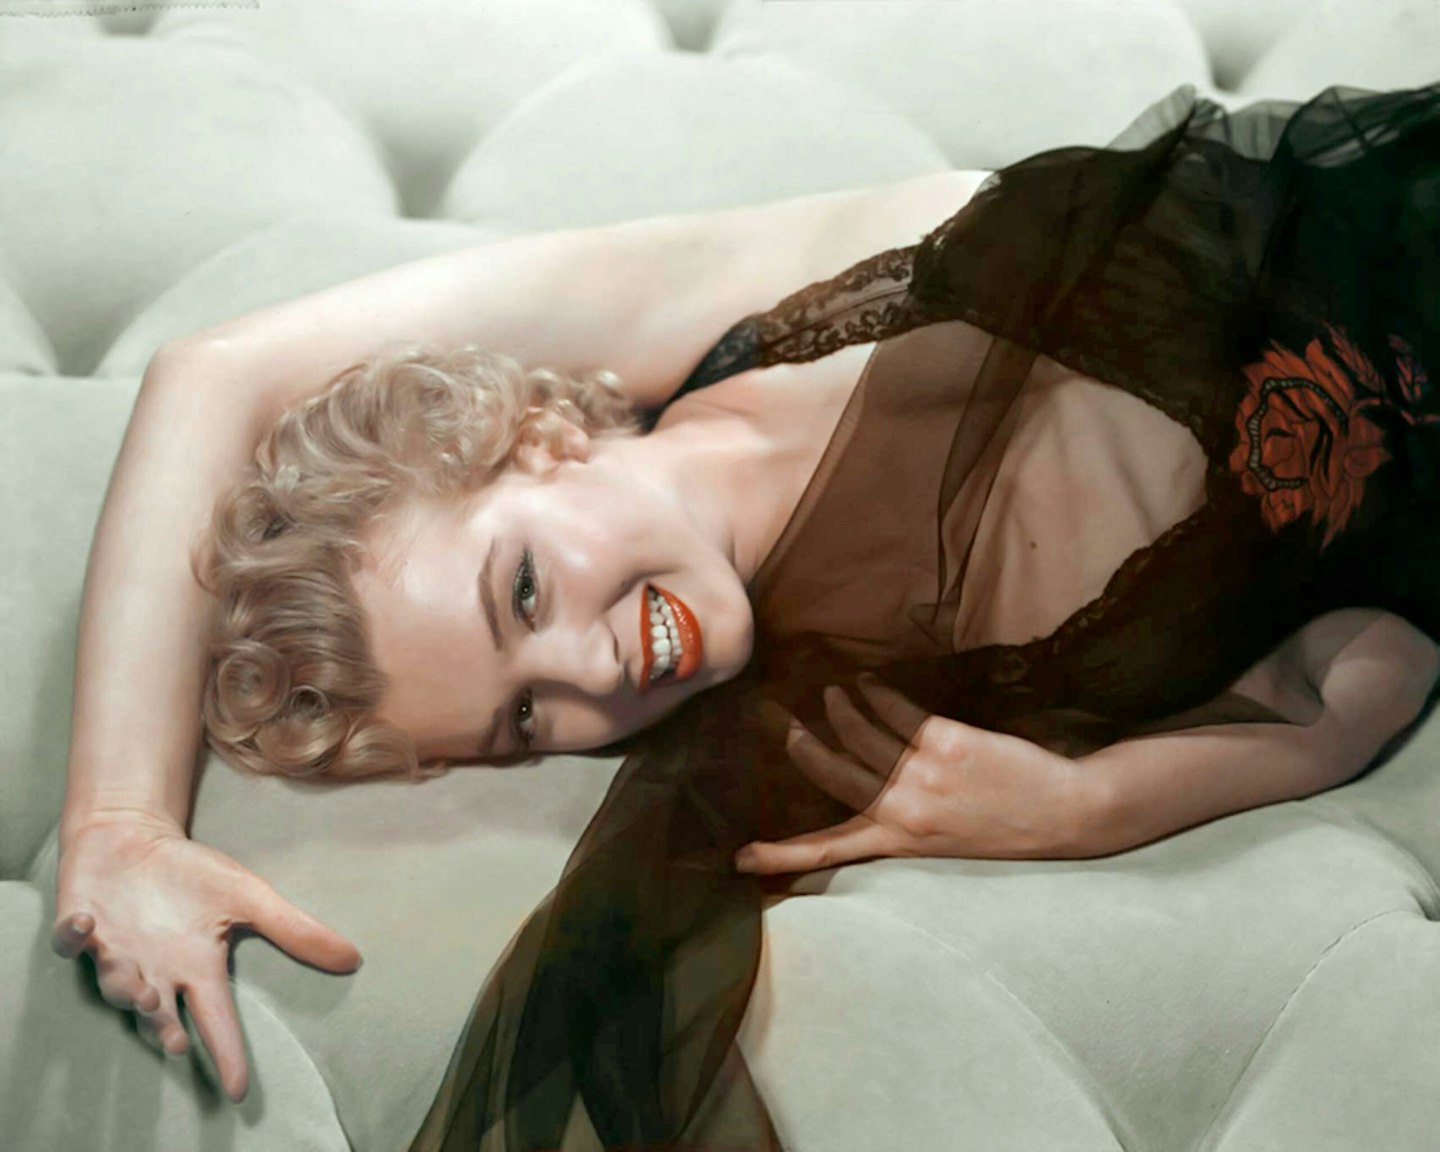 50 years later, Marilyn Monroe still influences fashion and beauty